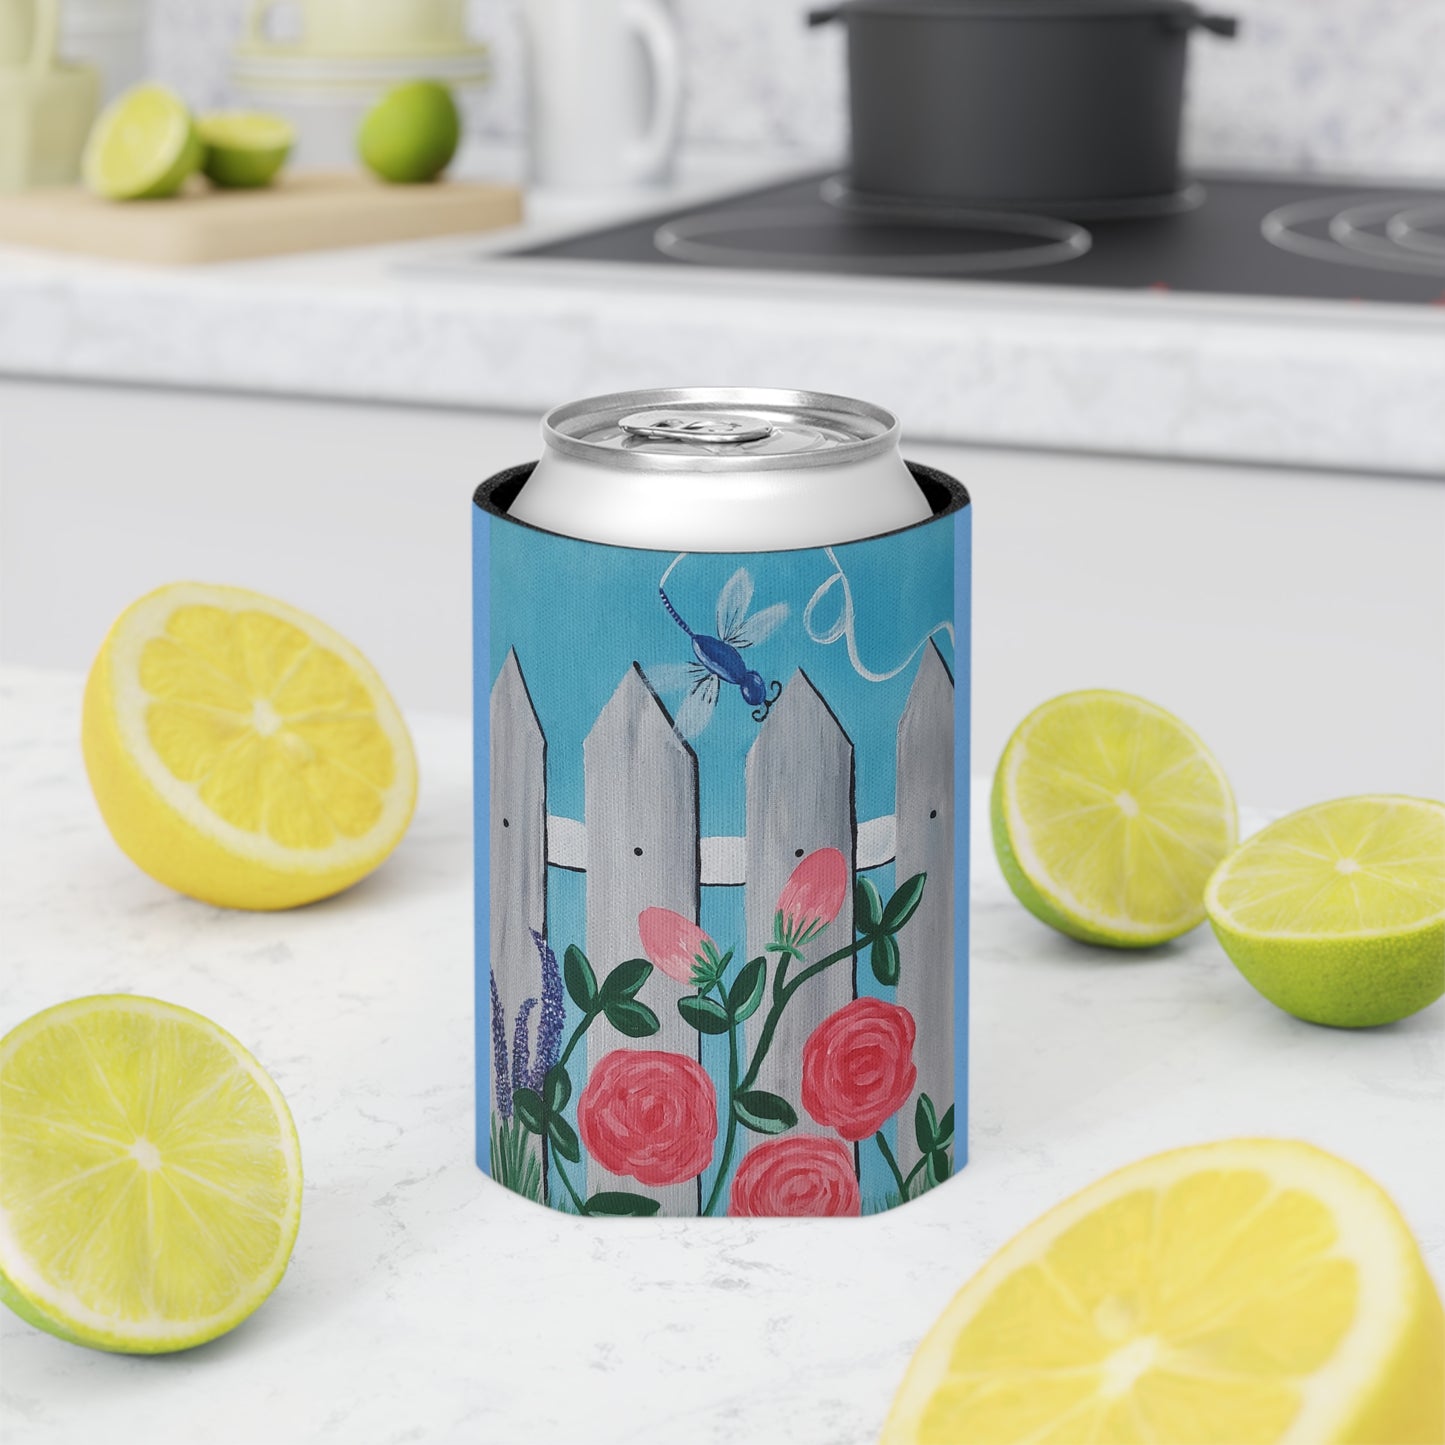 Spring is in the air Regular Can Cooler Sleeve (Brookson Collection) BLUE